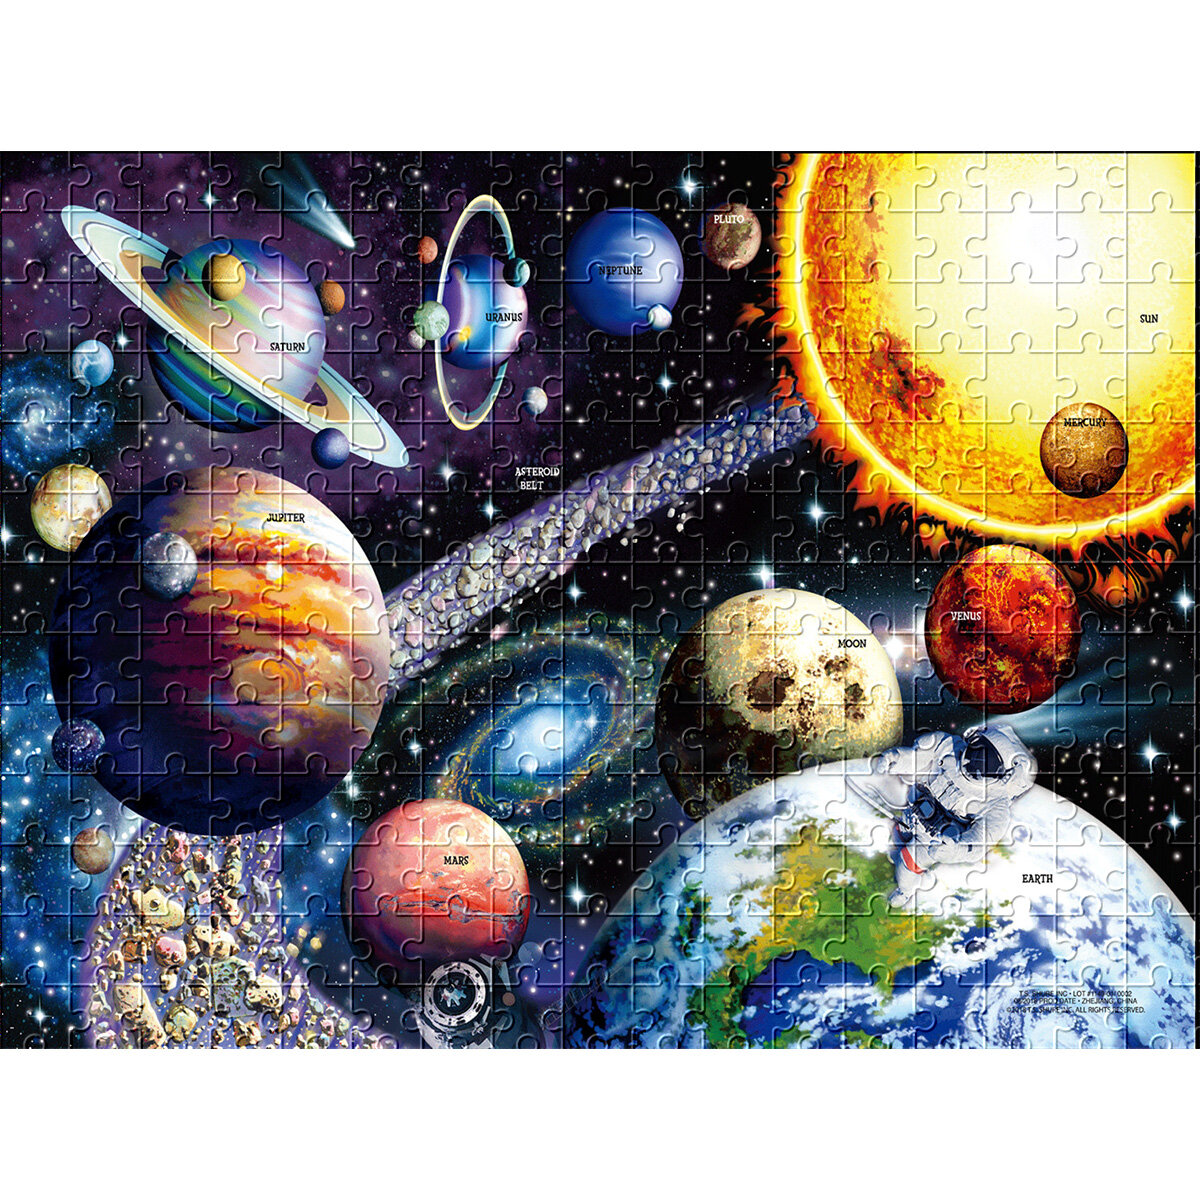 1000Pcs Jigsaw Puzzles Space Puzzles Solar System Planets Puzzles Cosmic Galaxy Puzzles Fun Family Game Toy Gifts for Ad